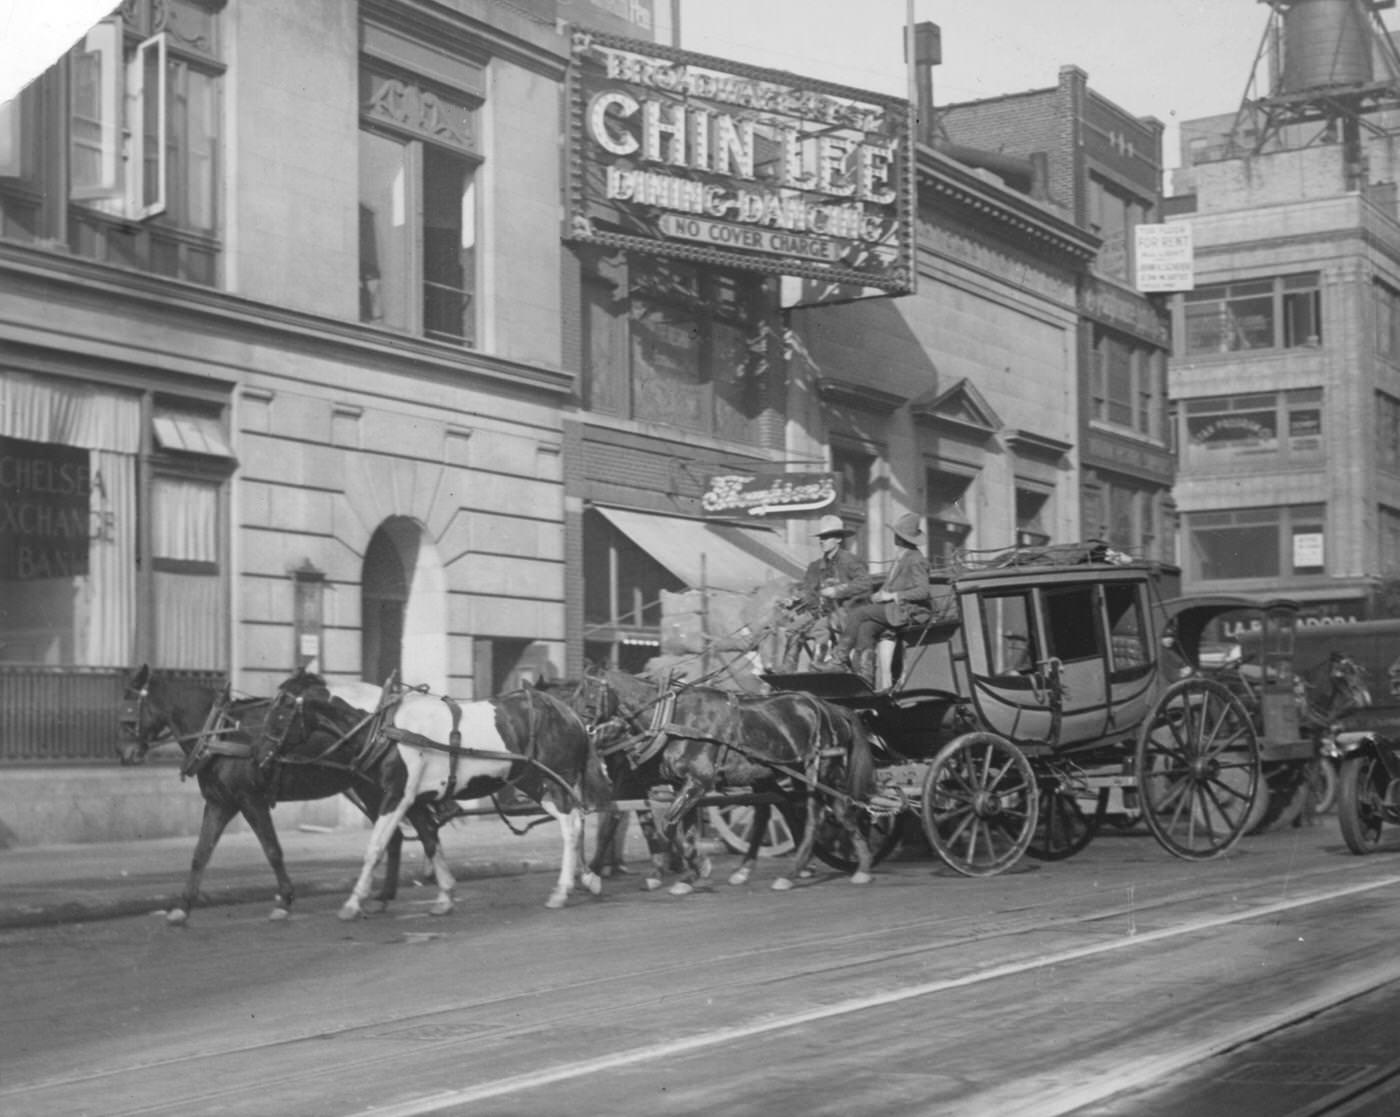 Horse Carriages In Front Of Chin Lee, East Side Of Broadway, Manhattan, 1929